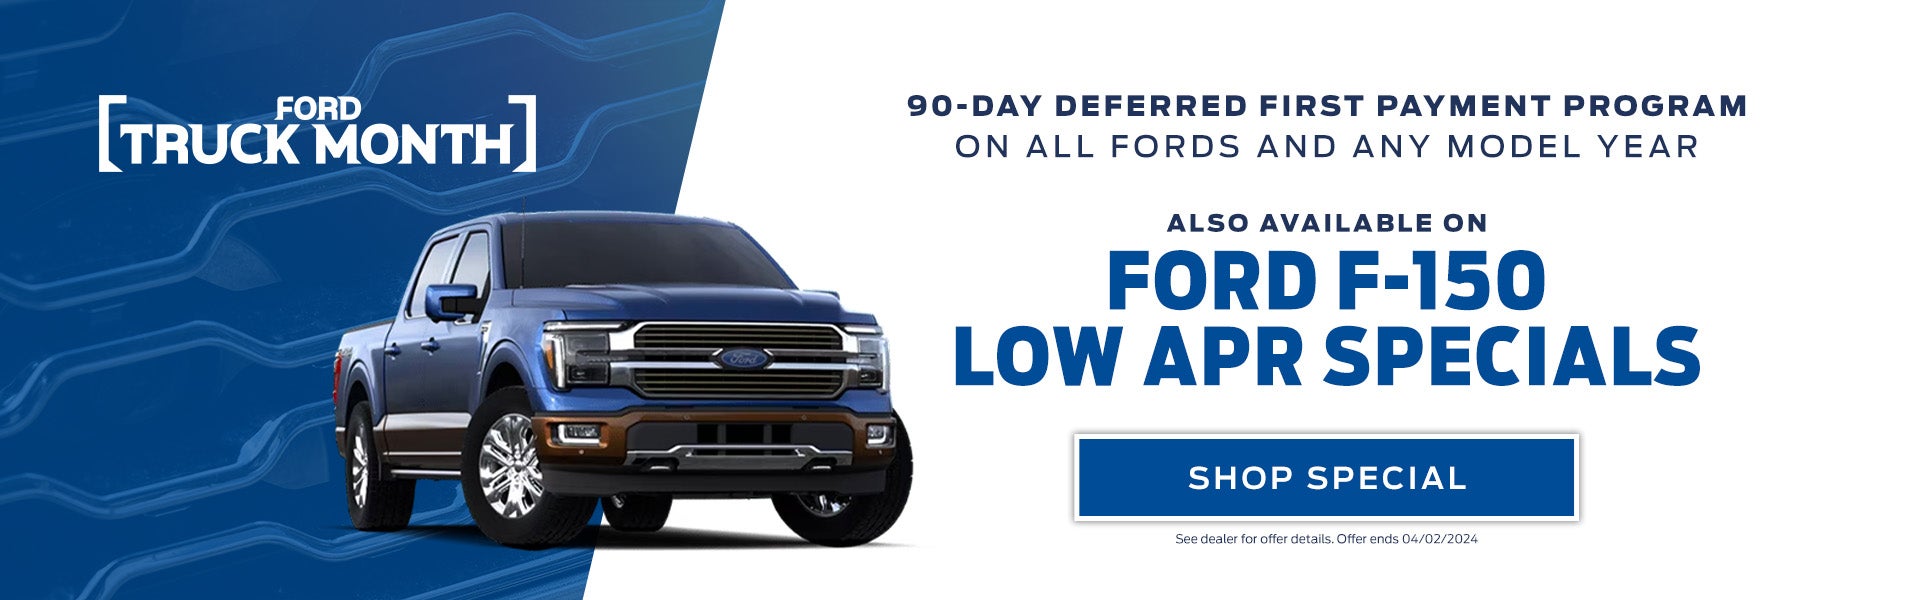 90-day deferred first payment program on all fords 